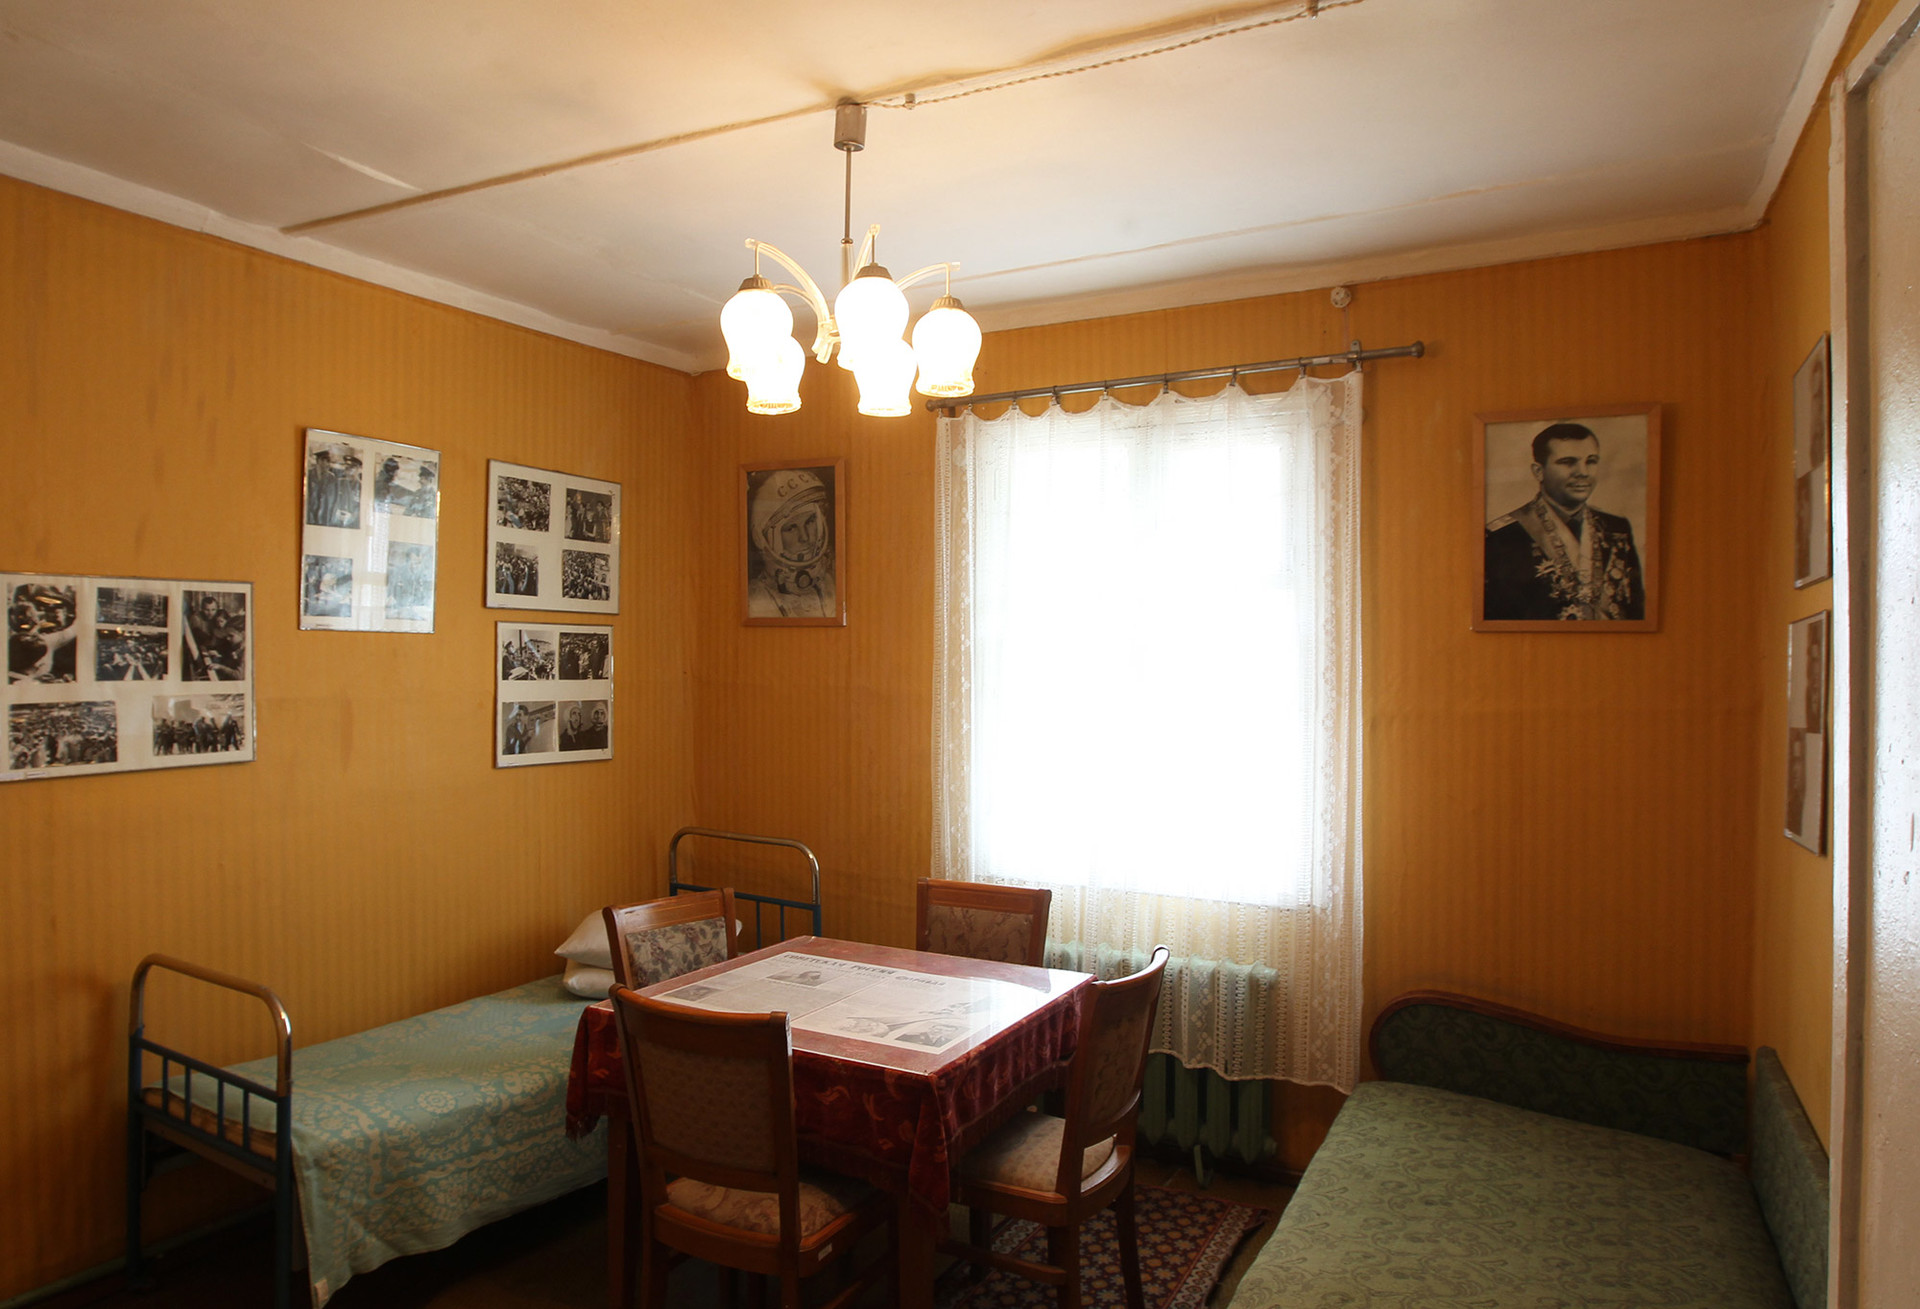 Interior of Yuri Gagarin's house, part of the exposition of the museum of the Baikonur Cosmodrome.